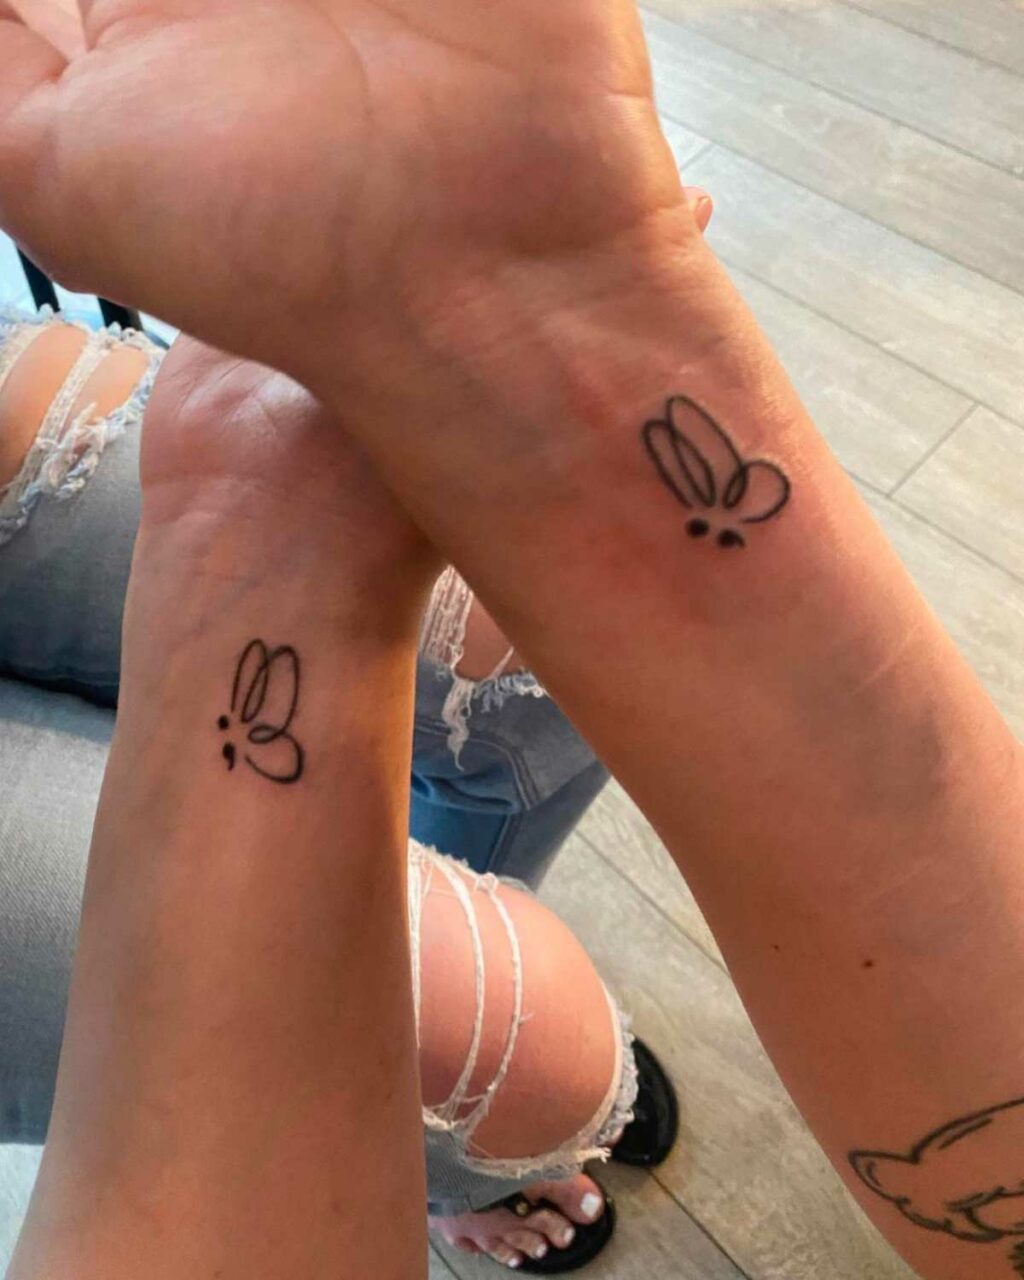 Two people with matching butterfly tattoos on their wrists, a symbol of their friendship and bond.